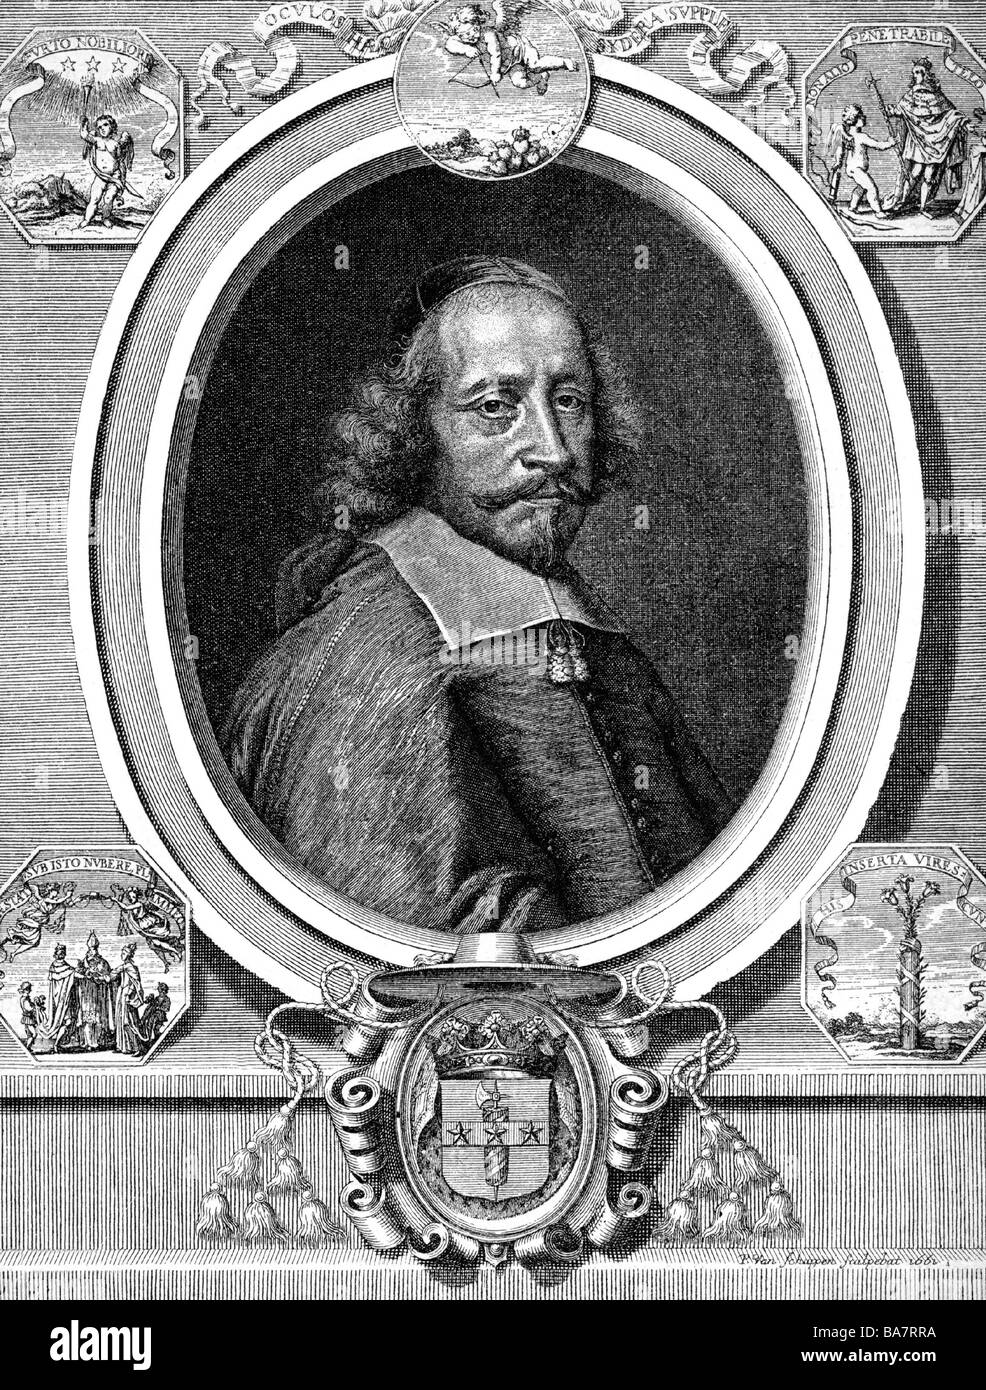 Mazarin, Jules, 14.7.1602 - 9.3.1661, French politician, cardinal 1641, head minister 1643 - 1661, portrait in frame, copper engraving by Pieter van Schuppen, after painting by Pierre Mignnard, 17th century, Artist's Copyright has not to be cleared Stock Photo